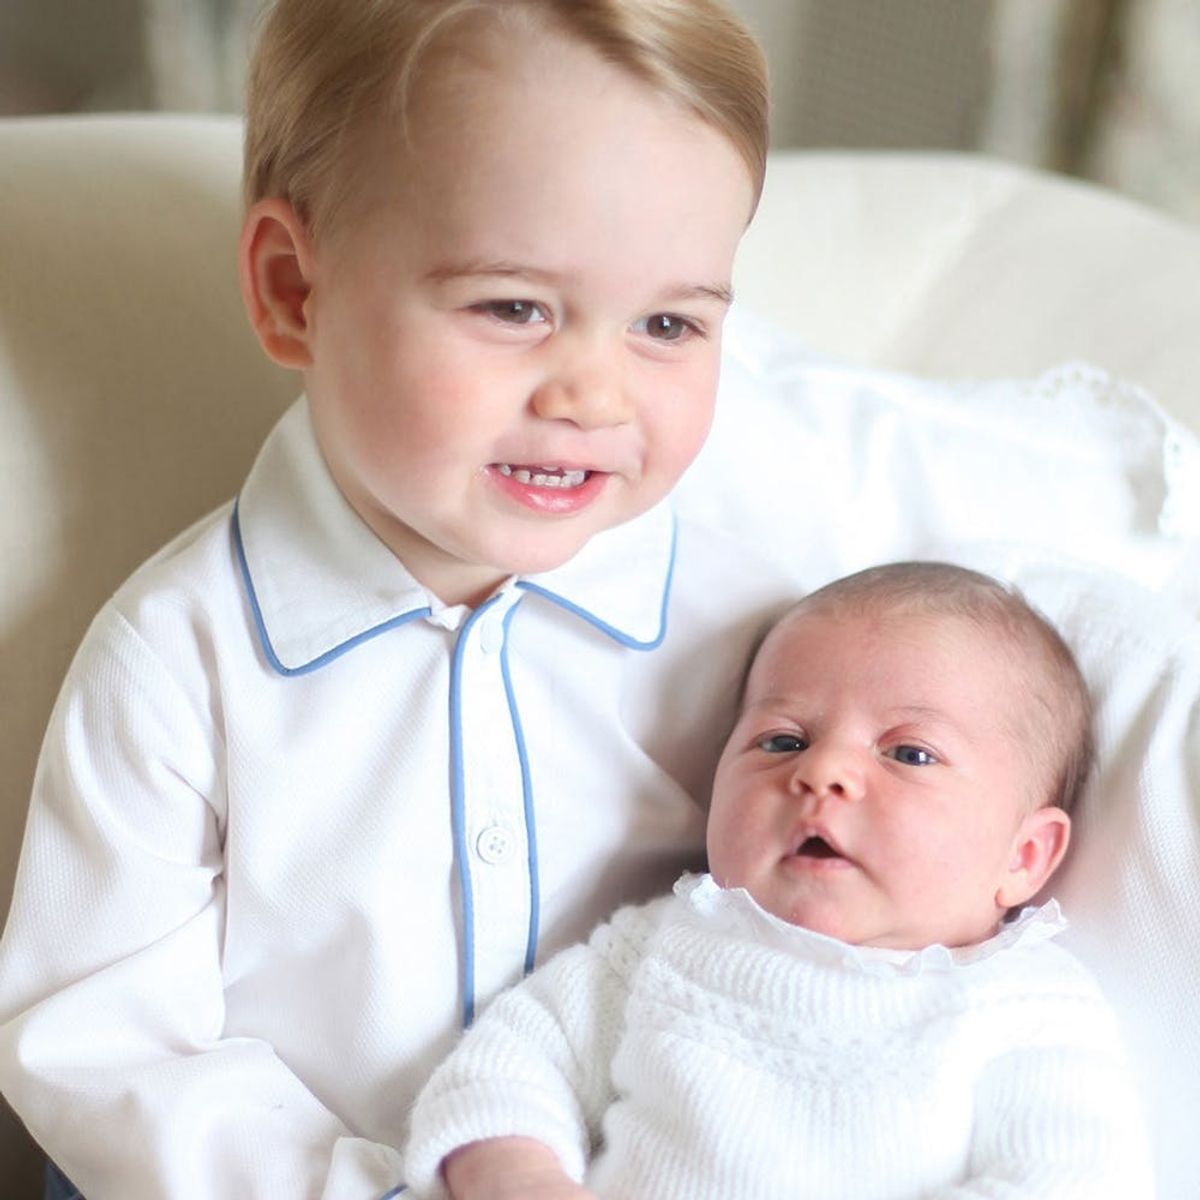 The One Thing You Need to Know About Those Princess Charlotte Pics